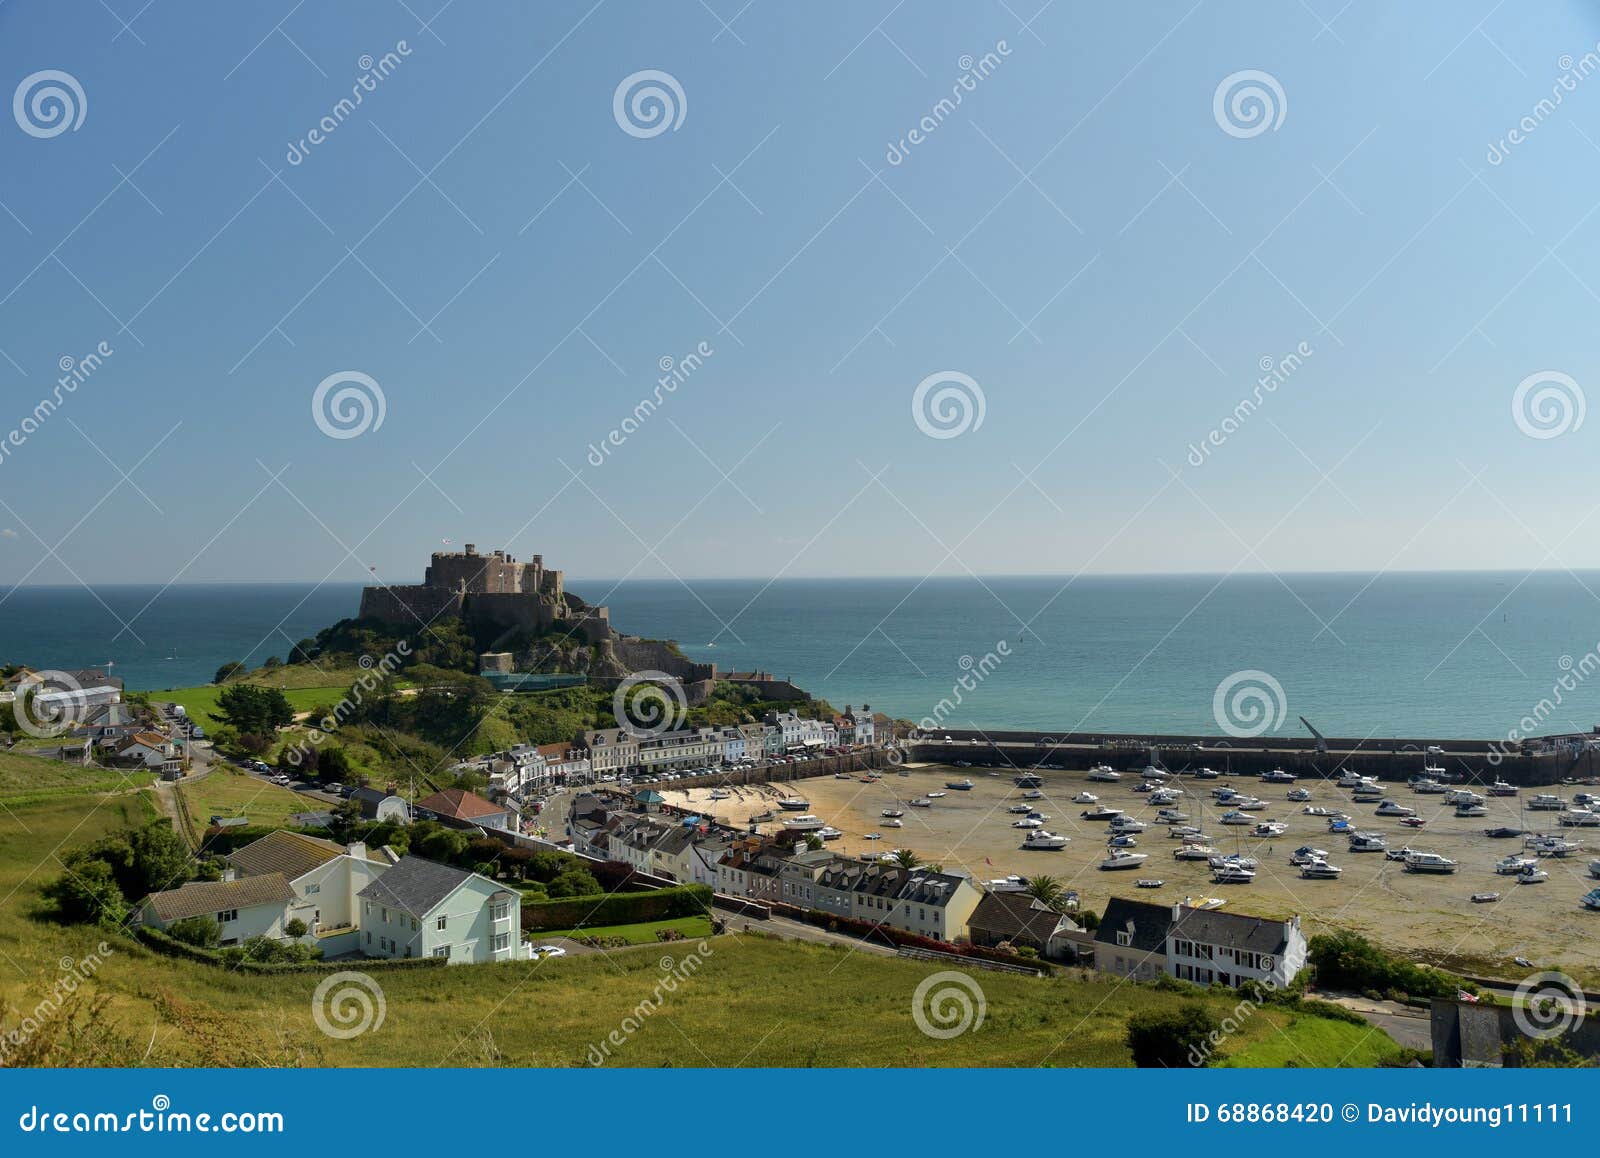 view over gorey castle and harbour, jersey